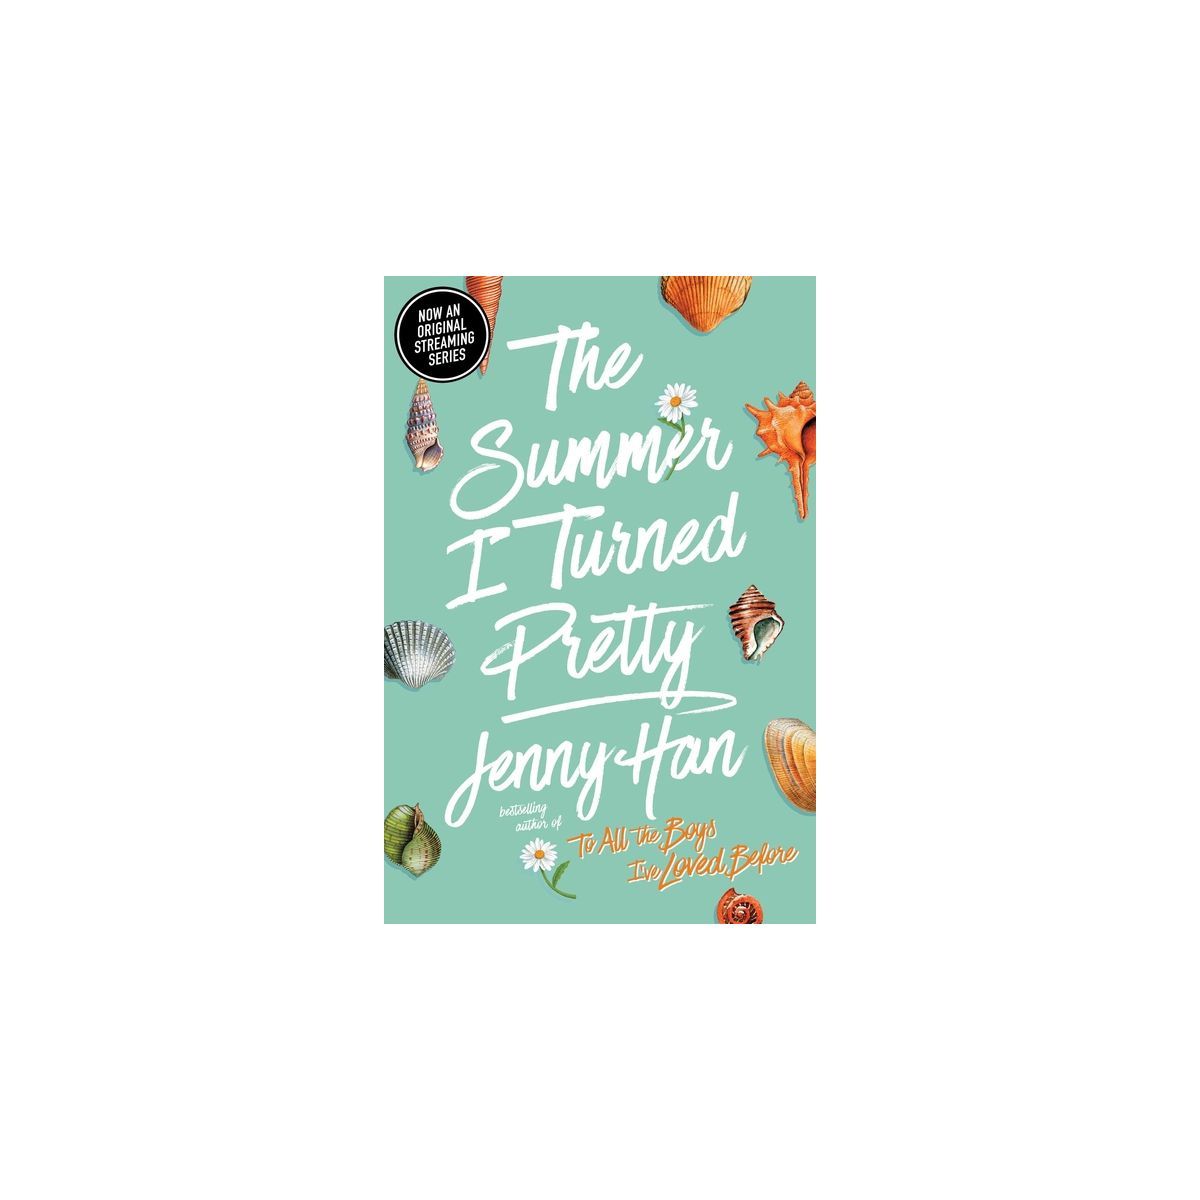 The Summer I Turned Pretty (Paperback) by Jenny Han | Target